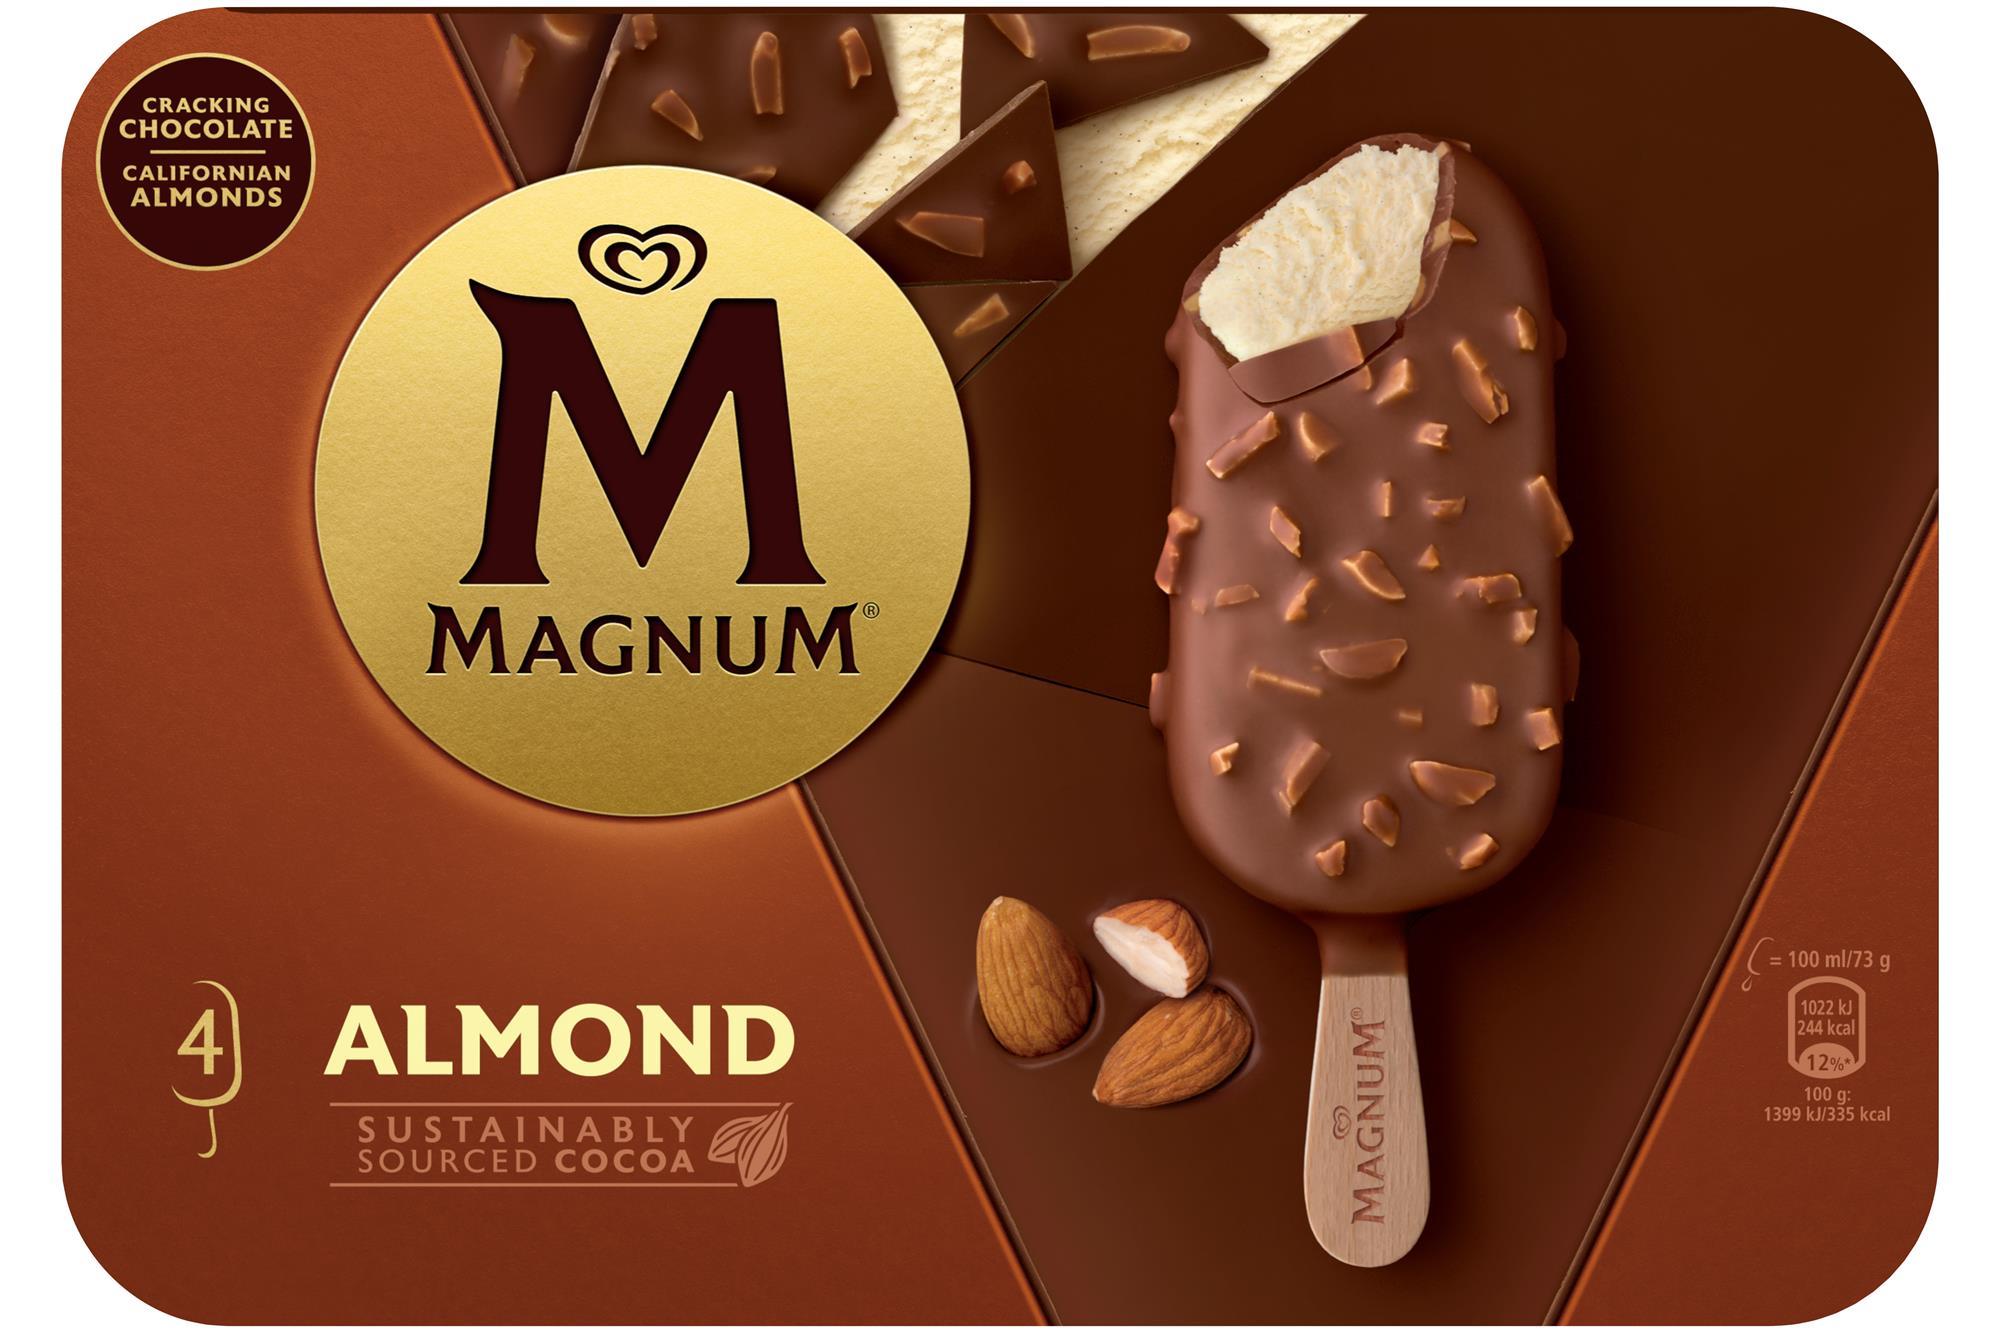 Unilever invests in Magnum ice cream with £10m rebrand | News | The Grocer